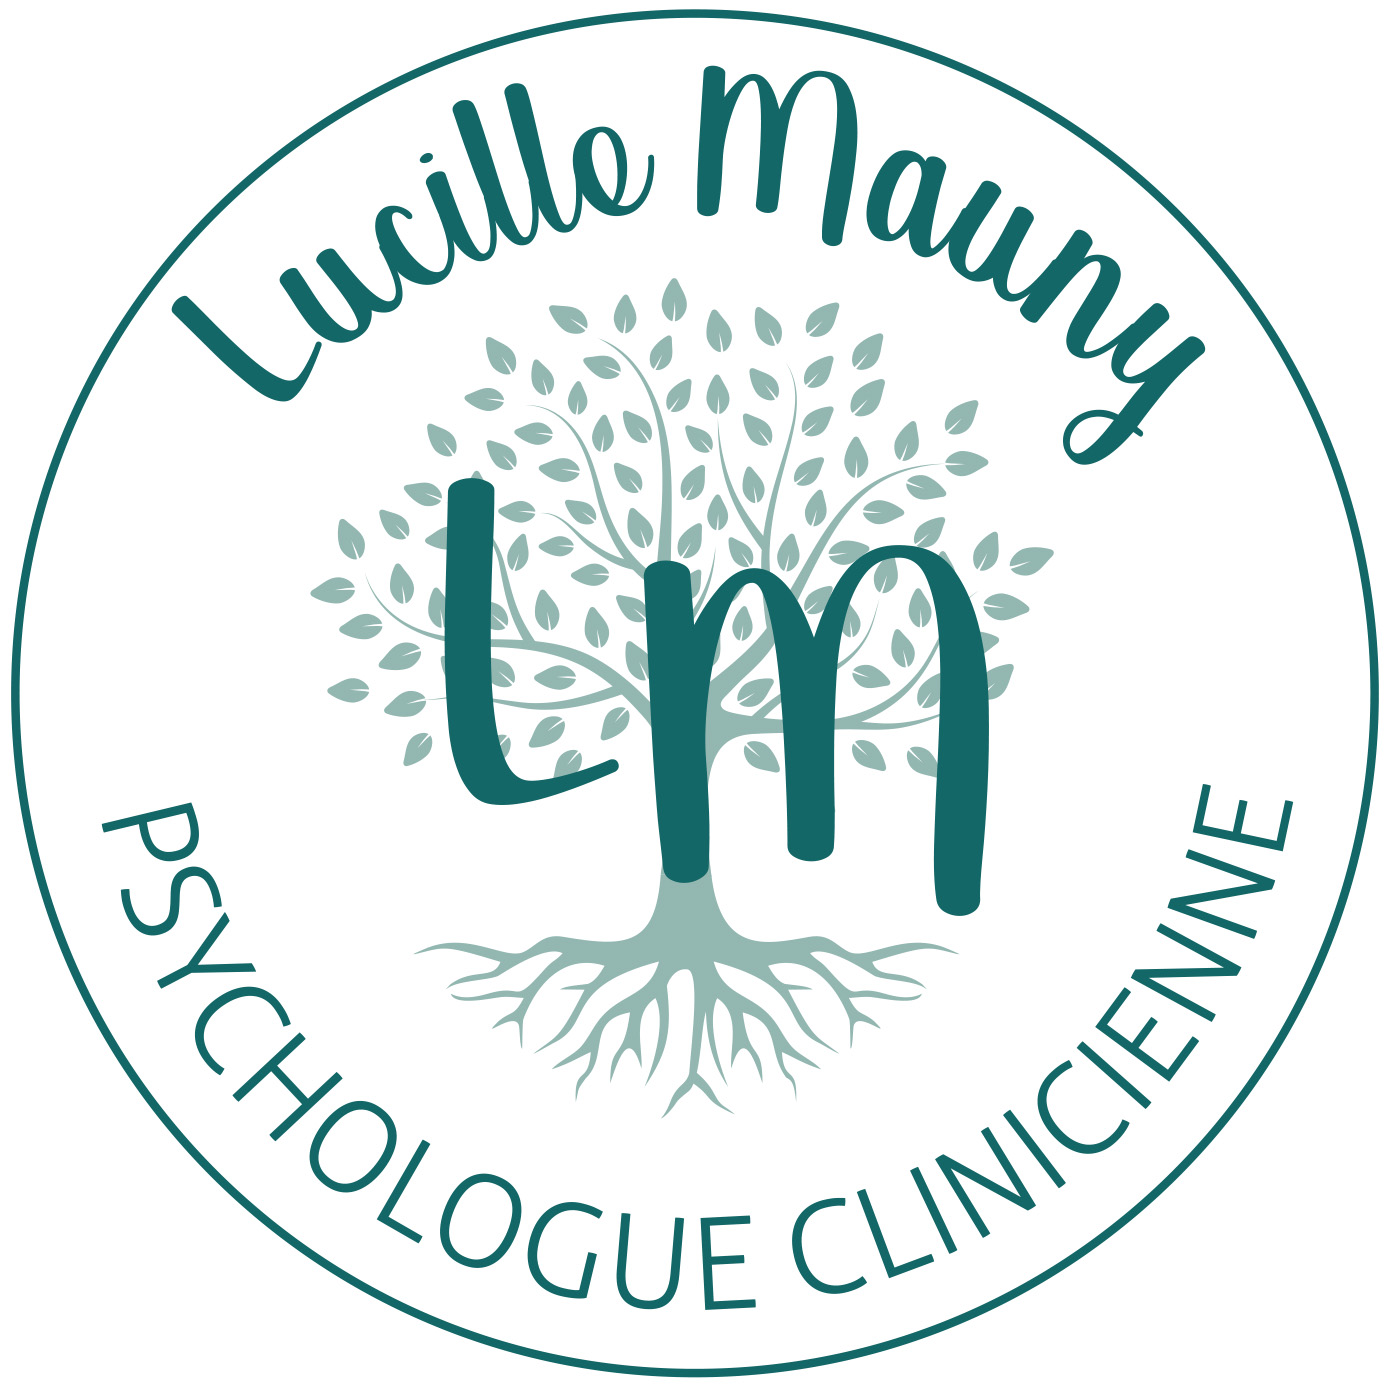 Lucille Mauny Psychologue